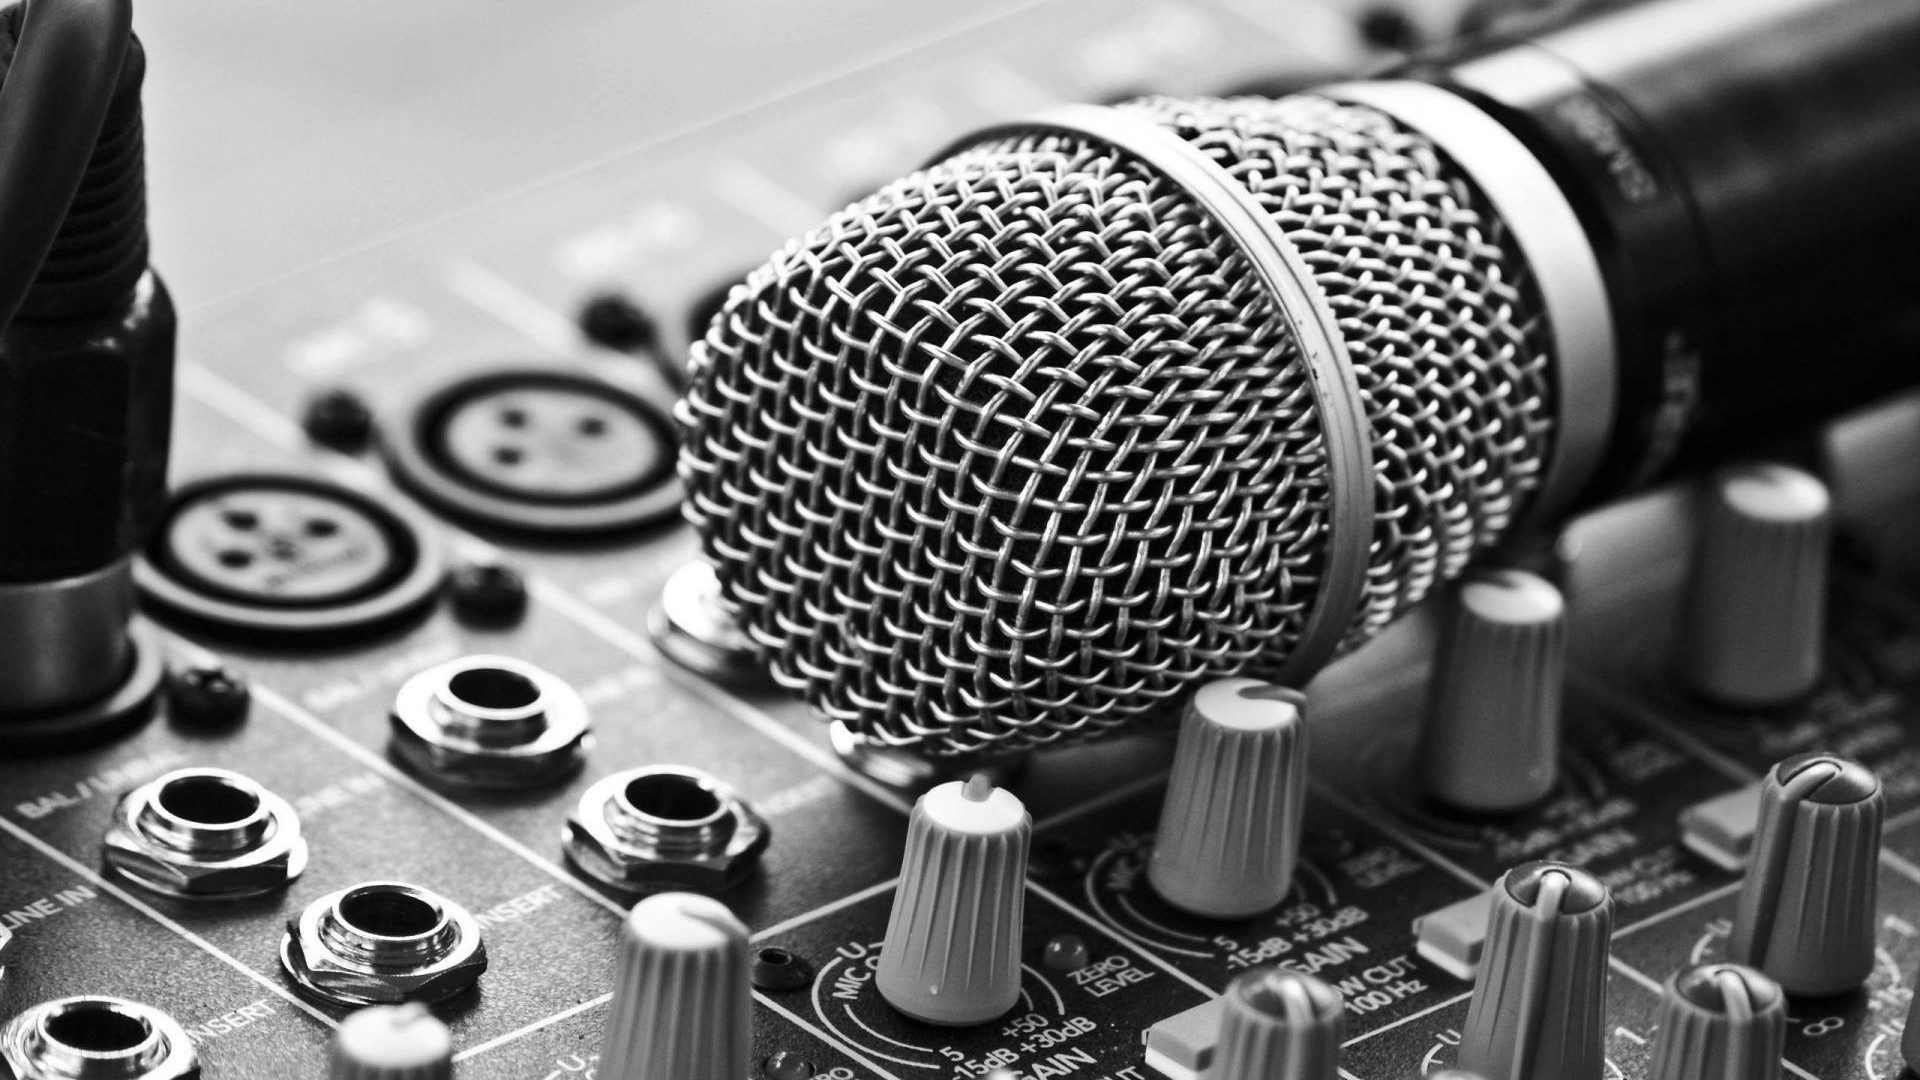 Monochrome Photography Closeup Microphone Mixing Consoles Technology Music Depth Of Field Buttons 1920x1080